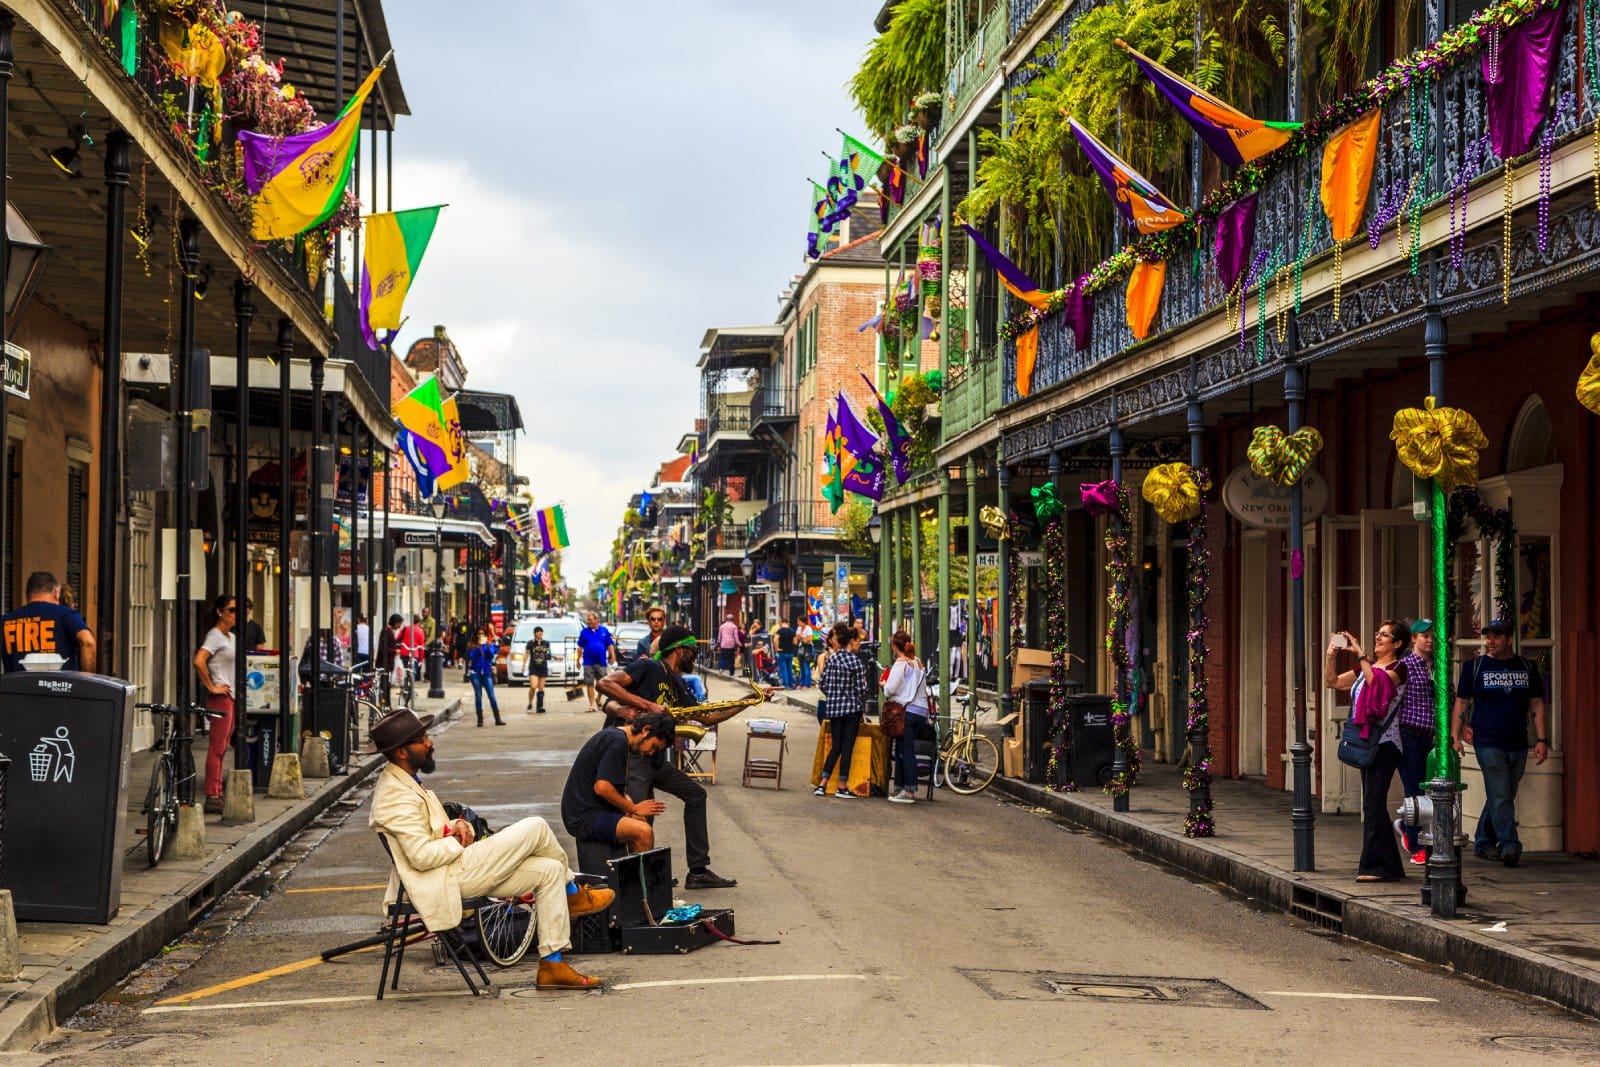 <p><span>Immerse yourself in the vibrant music, cuisine, and culture of New Orleans, with its lively jazz clubs, Cajun cuisine, and colorful architecture that transport you to the streets of the Caribbean and Europe.</span></p>